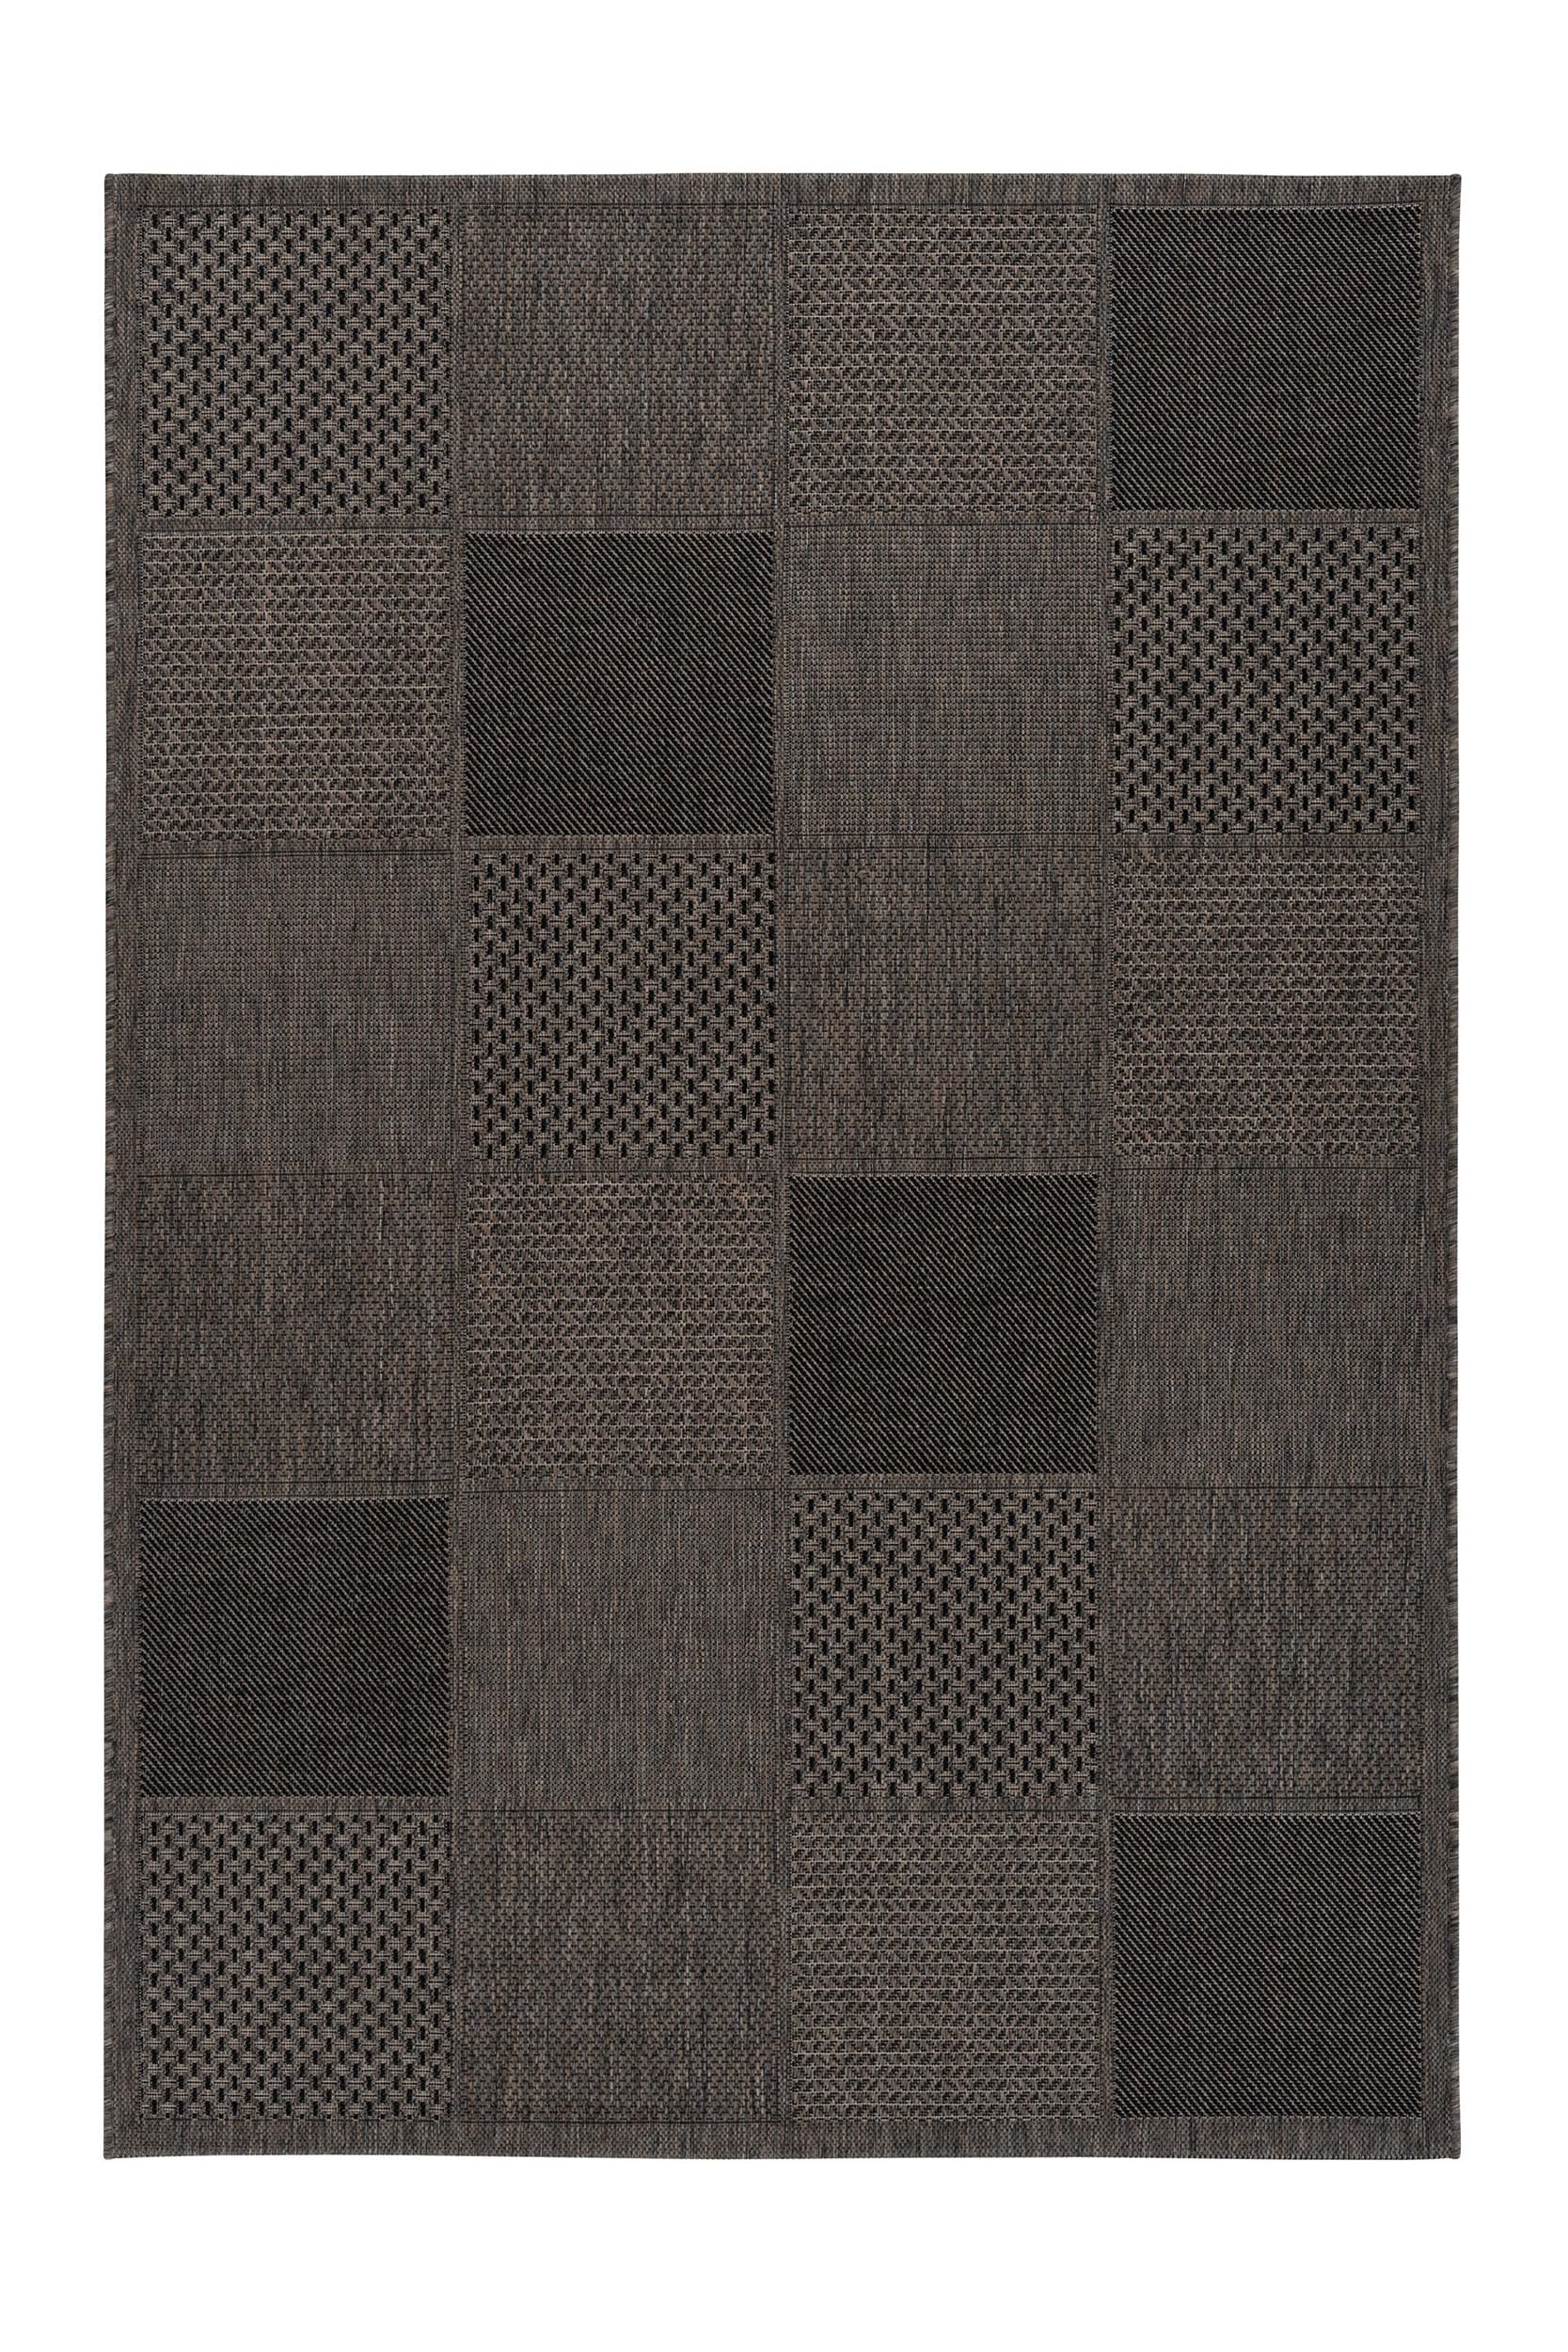 Outdoor Teppich "Sunmotion" taupe, 200x290cm